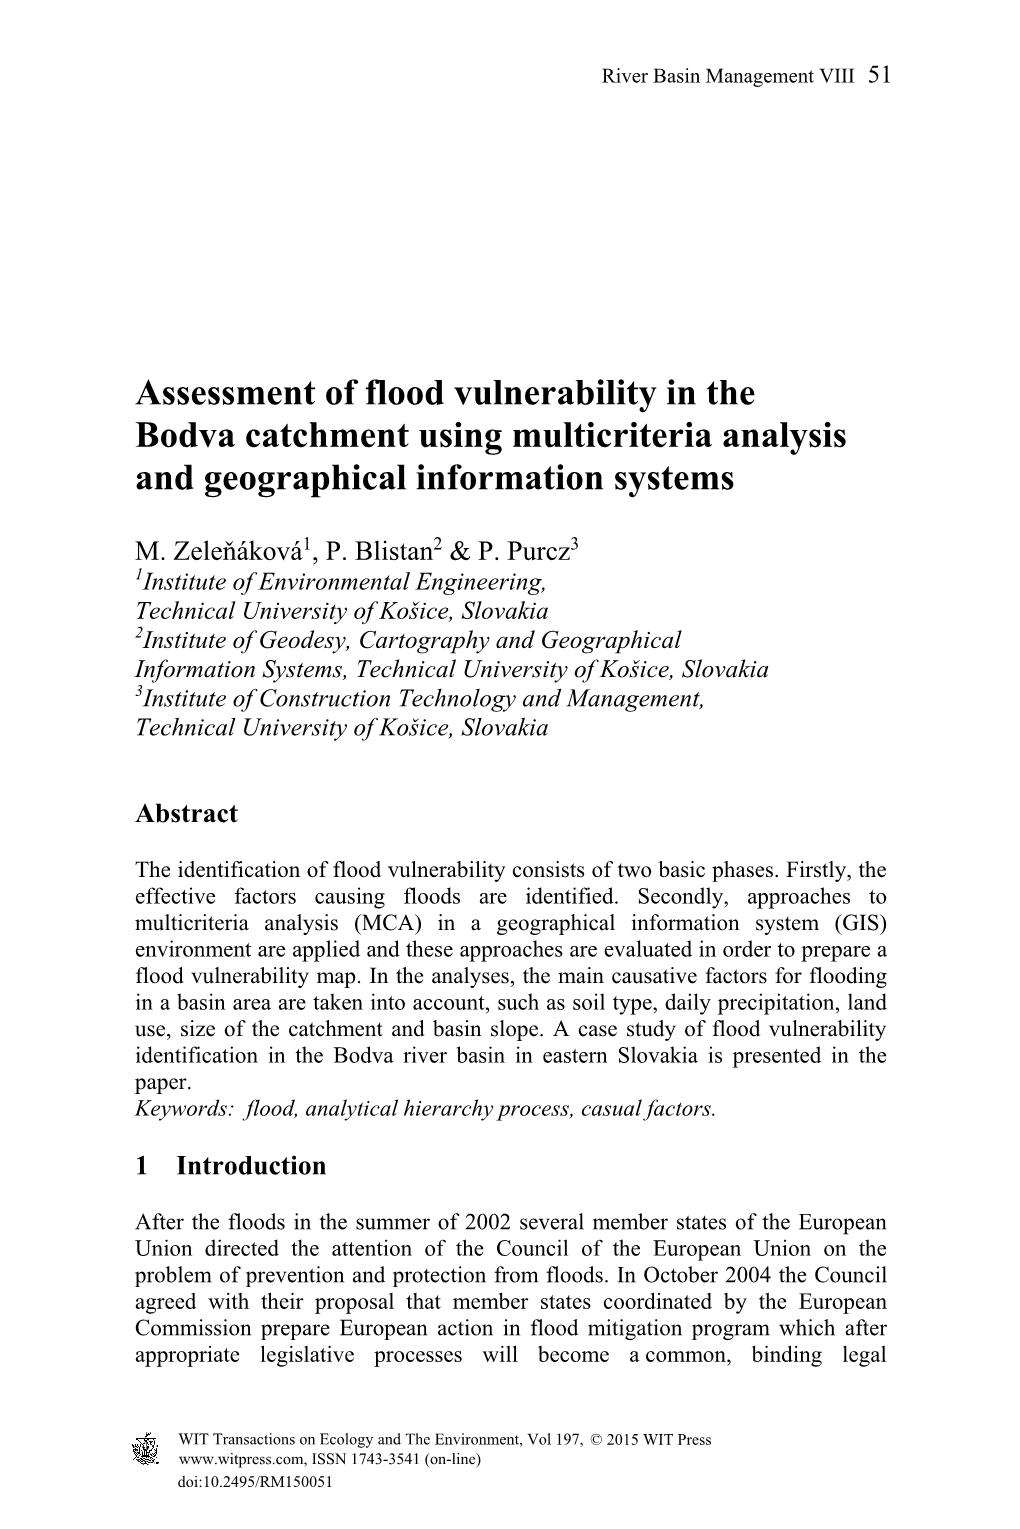 Assessment of Flood Vulnerability in the Bodva Catchment Using Multicriteria Analysis and Geographical Information Systems